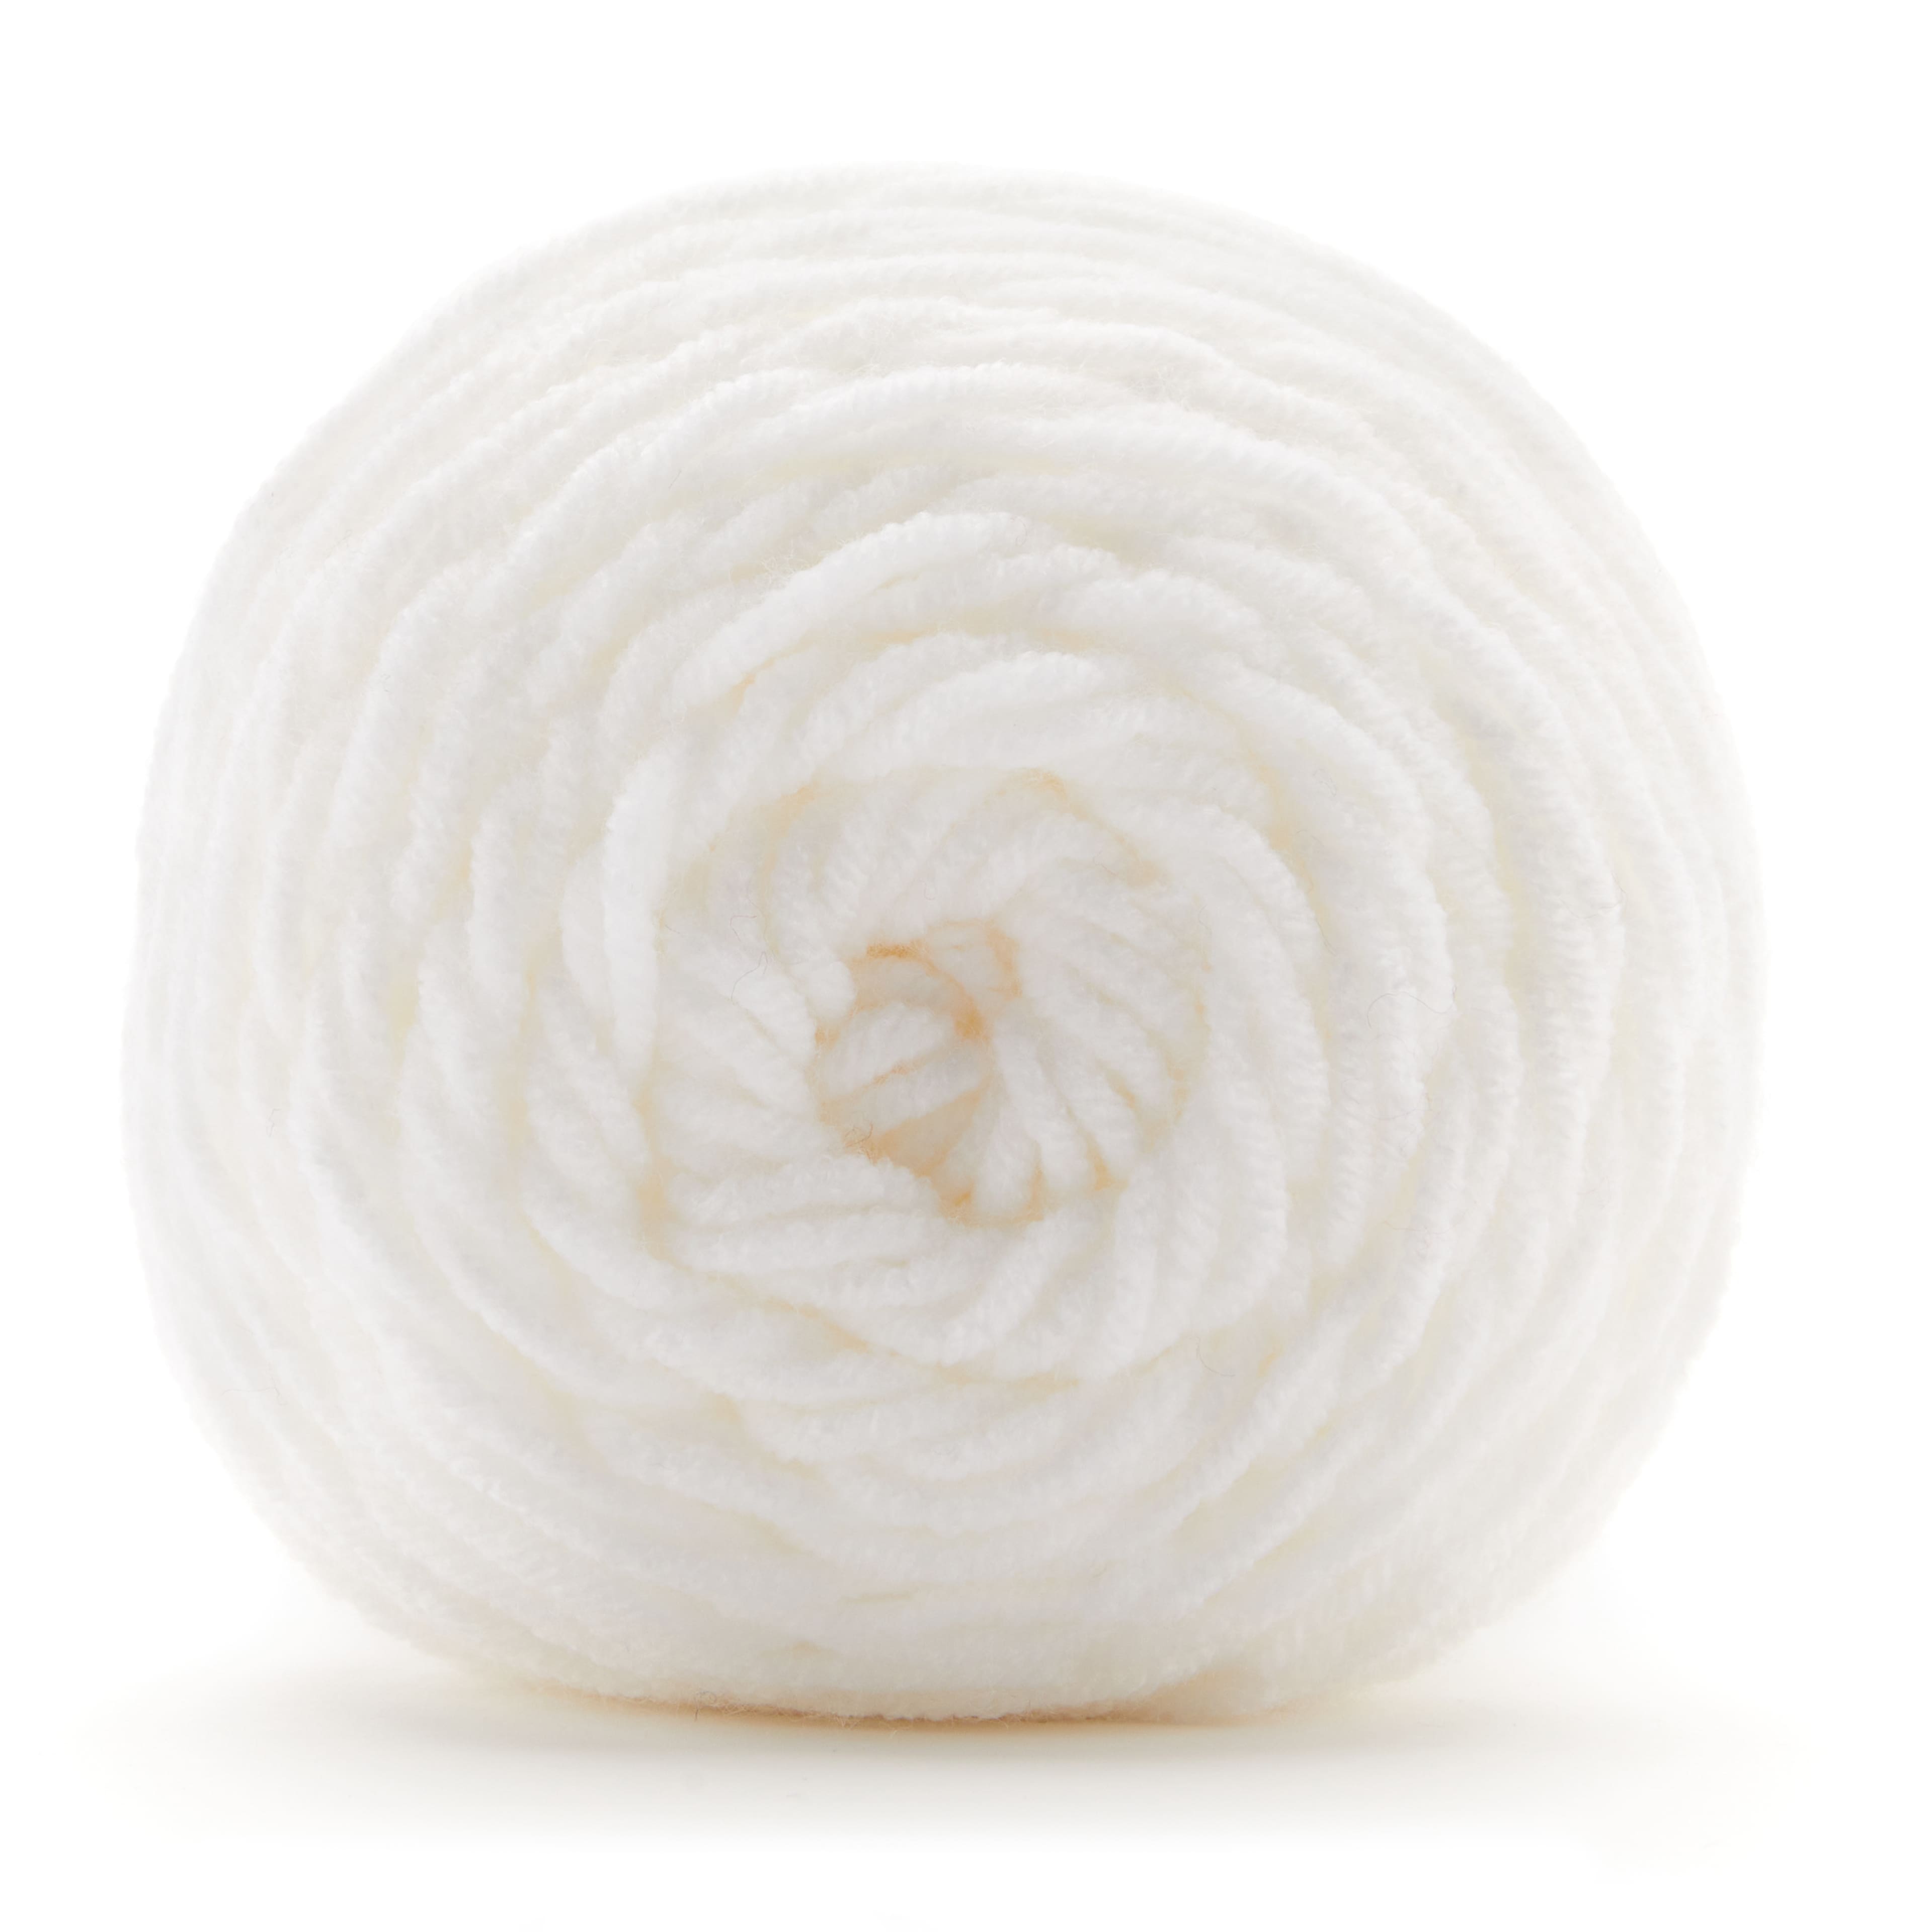 Michaels Stores - ALL yarn on sale! Every skein, every style! http